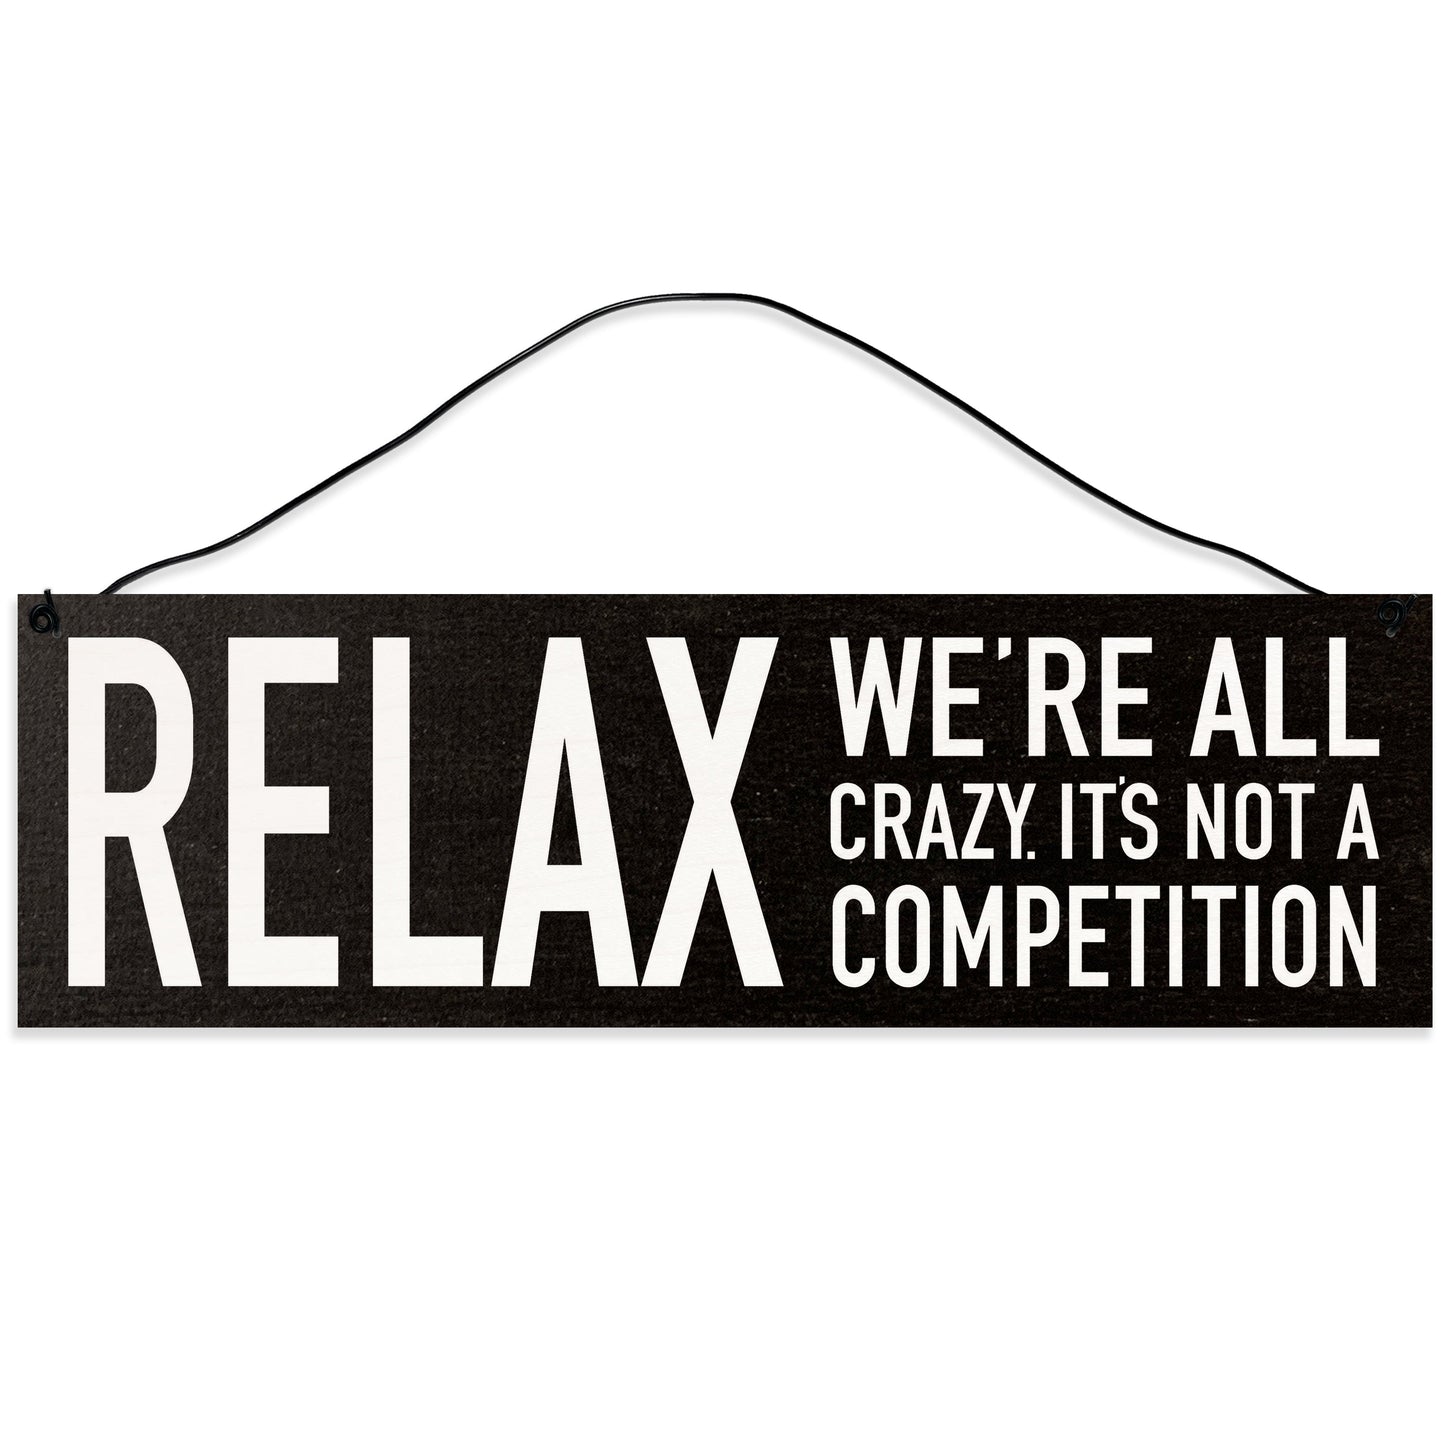 Sawyer's Mill - Relax. We're All Crazy. It's Not a Competition. Wood Sign for Home or Office. Measures 3x10 inches.